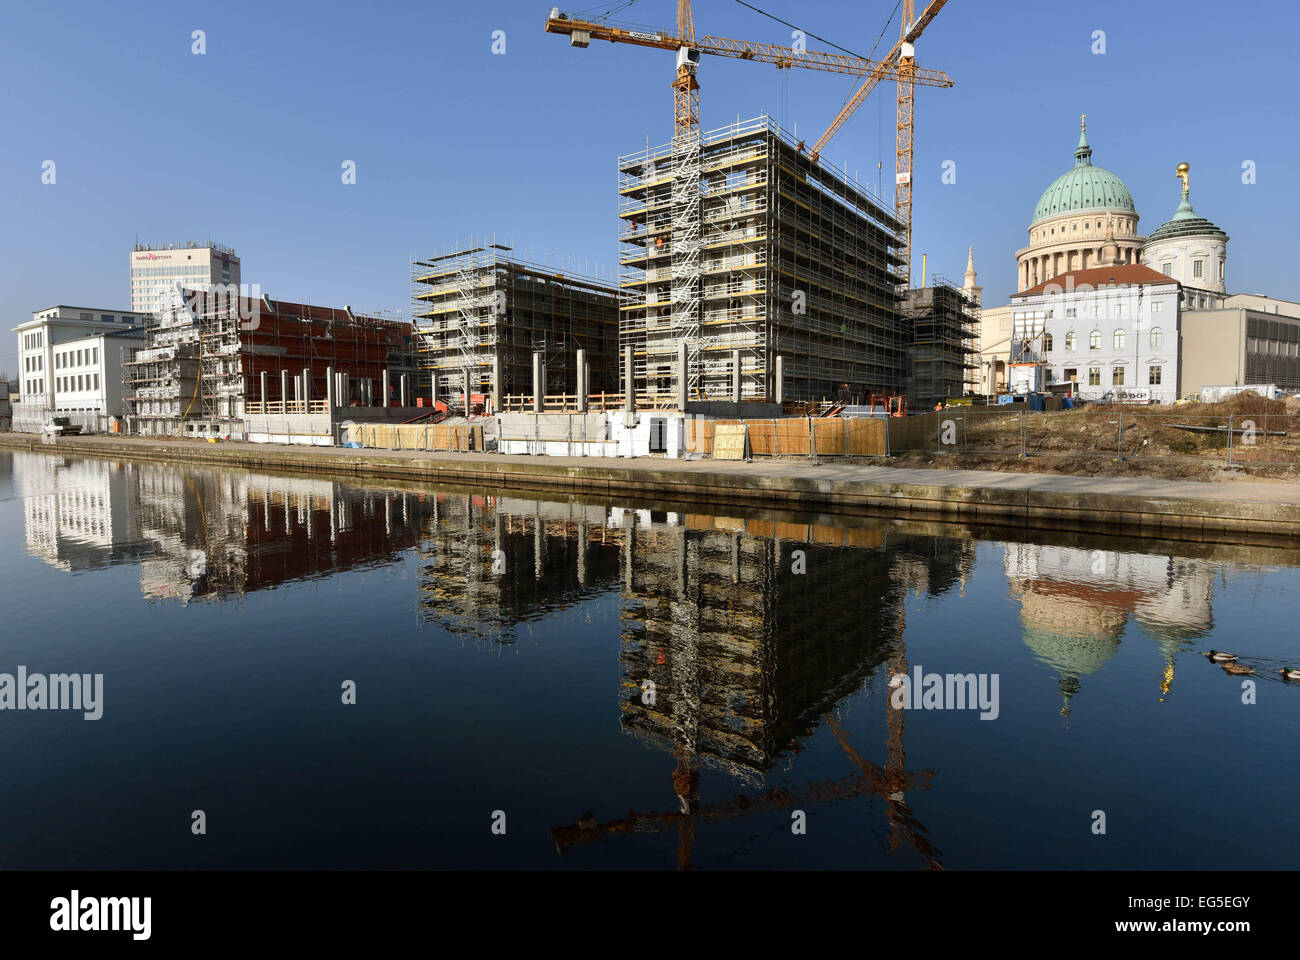 Potsdam, Germany. 17th Feb, 2015. Cranes stand at the construction site of the Palais Barberini at the Alten Fahrt in Potsdam, Germany, 17 February 2015. The building built after the example of the historic palace, will host the art museum of Hasso Plattner. Late 2016 the prestigous building will open with an exhibition of impressionist paintings. PHOTO: BERND SETTNIK/dpa/Alamy Live News Stock Photo